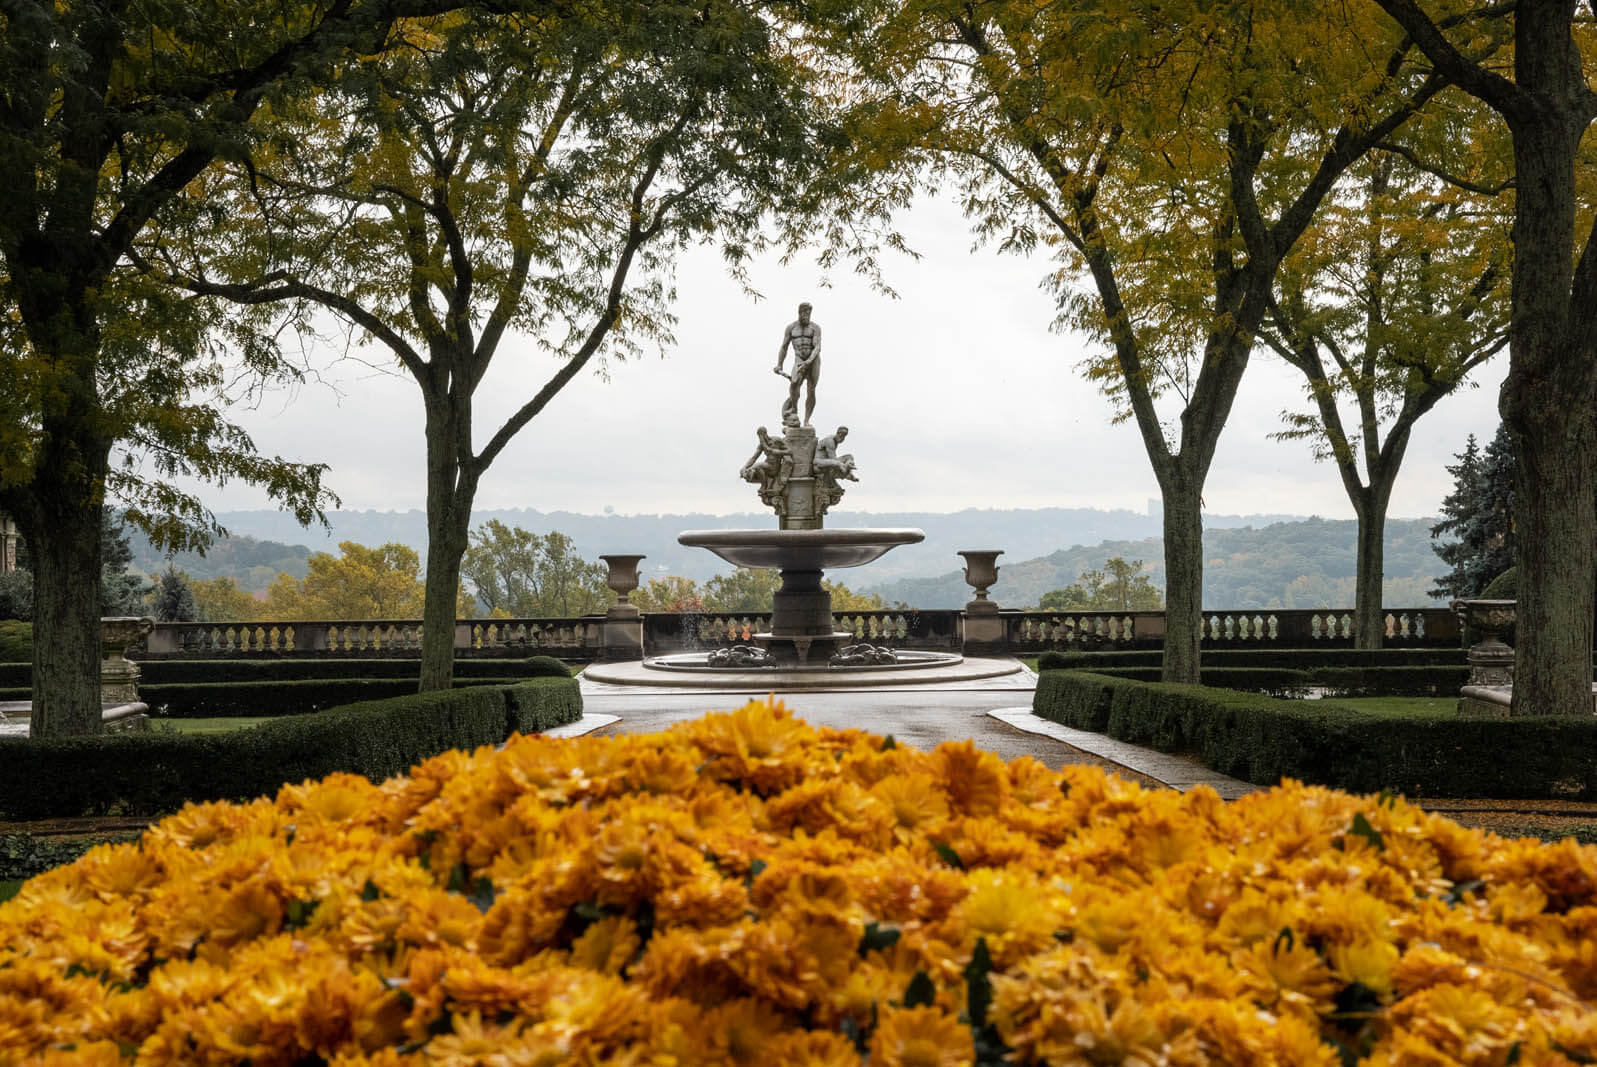 the fountain at Kykuit the Rockefeller Estate near Sleepy Hollow in the Hudson Valley New York